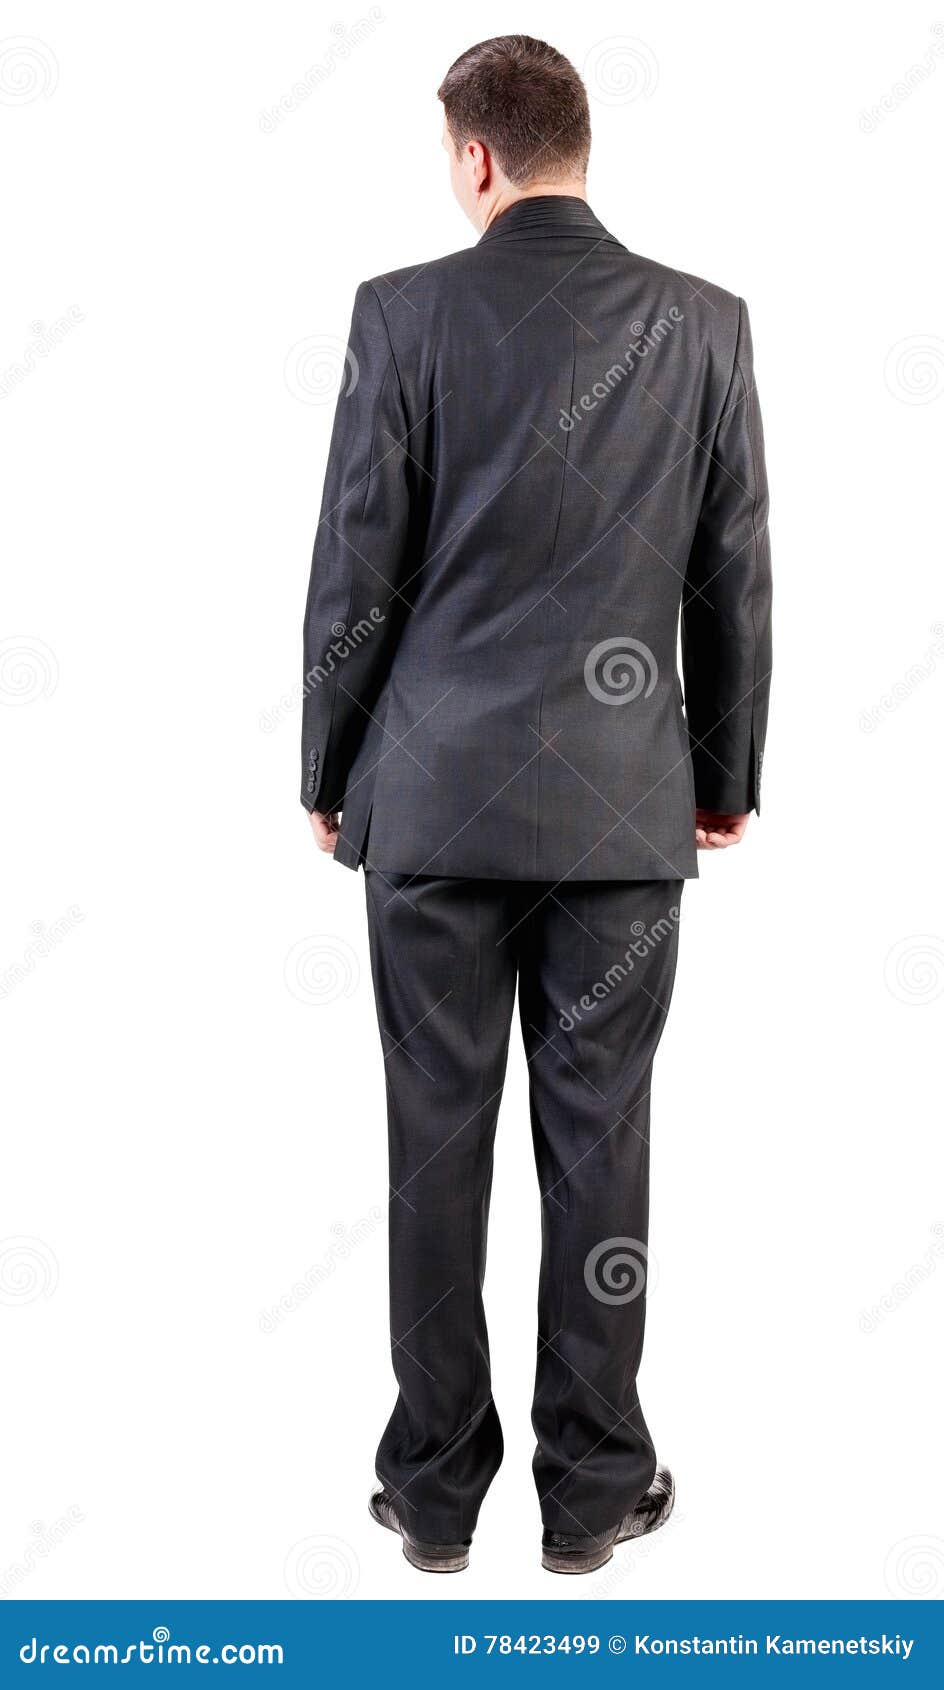 Back View of Business Man in Black Suit Watching. Stock Image - Image ...